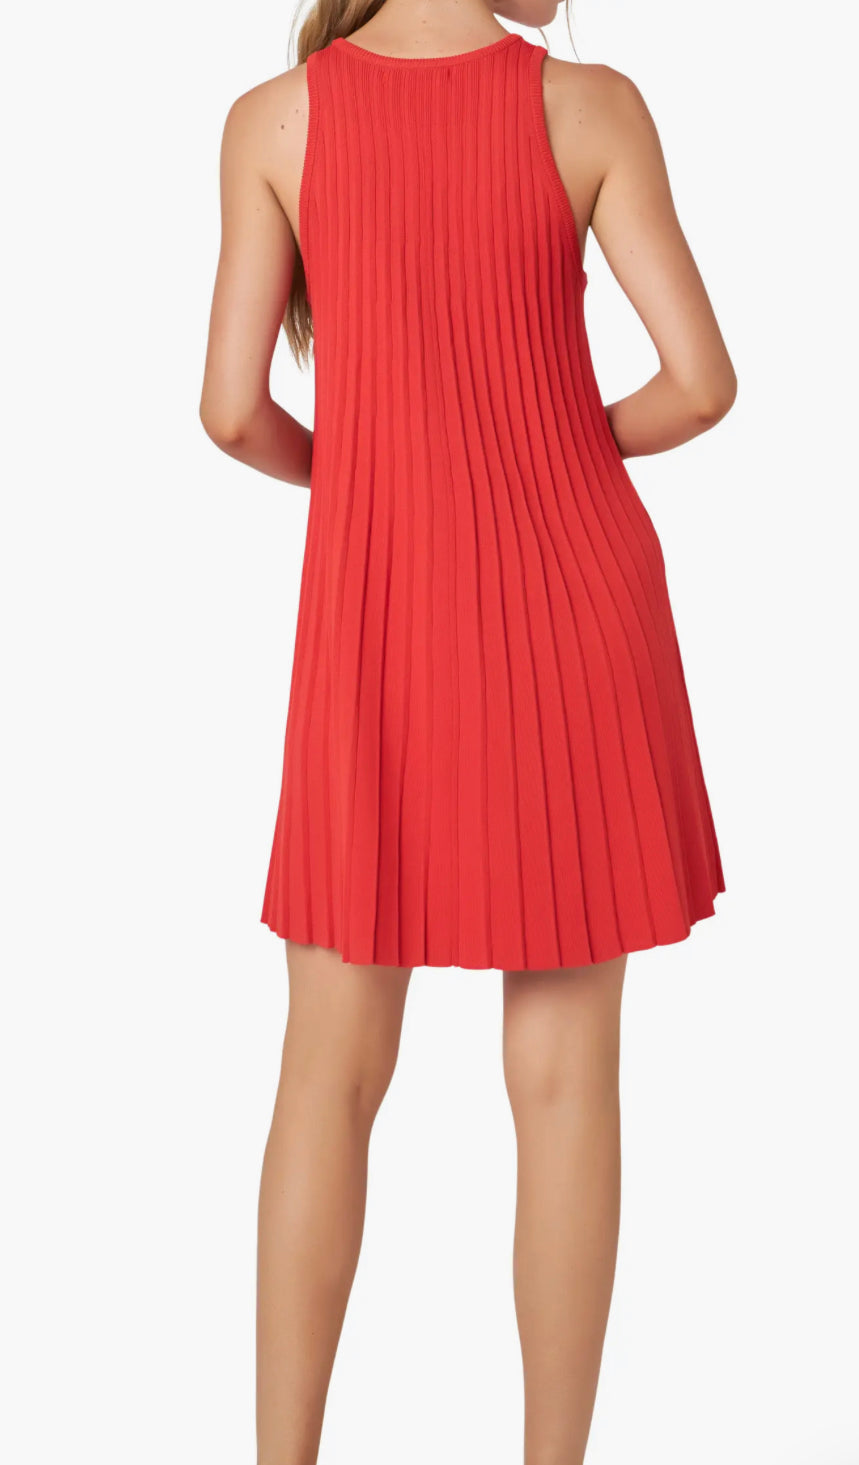 Pleated A-Line Knit Mini Dress in Red